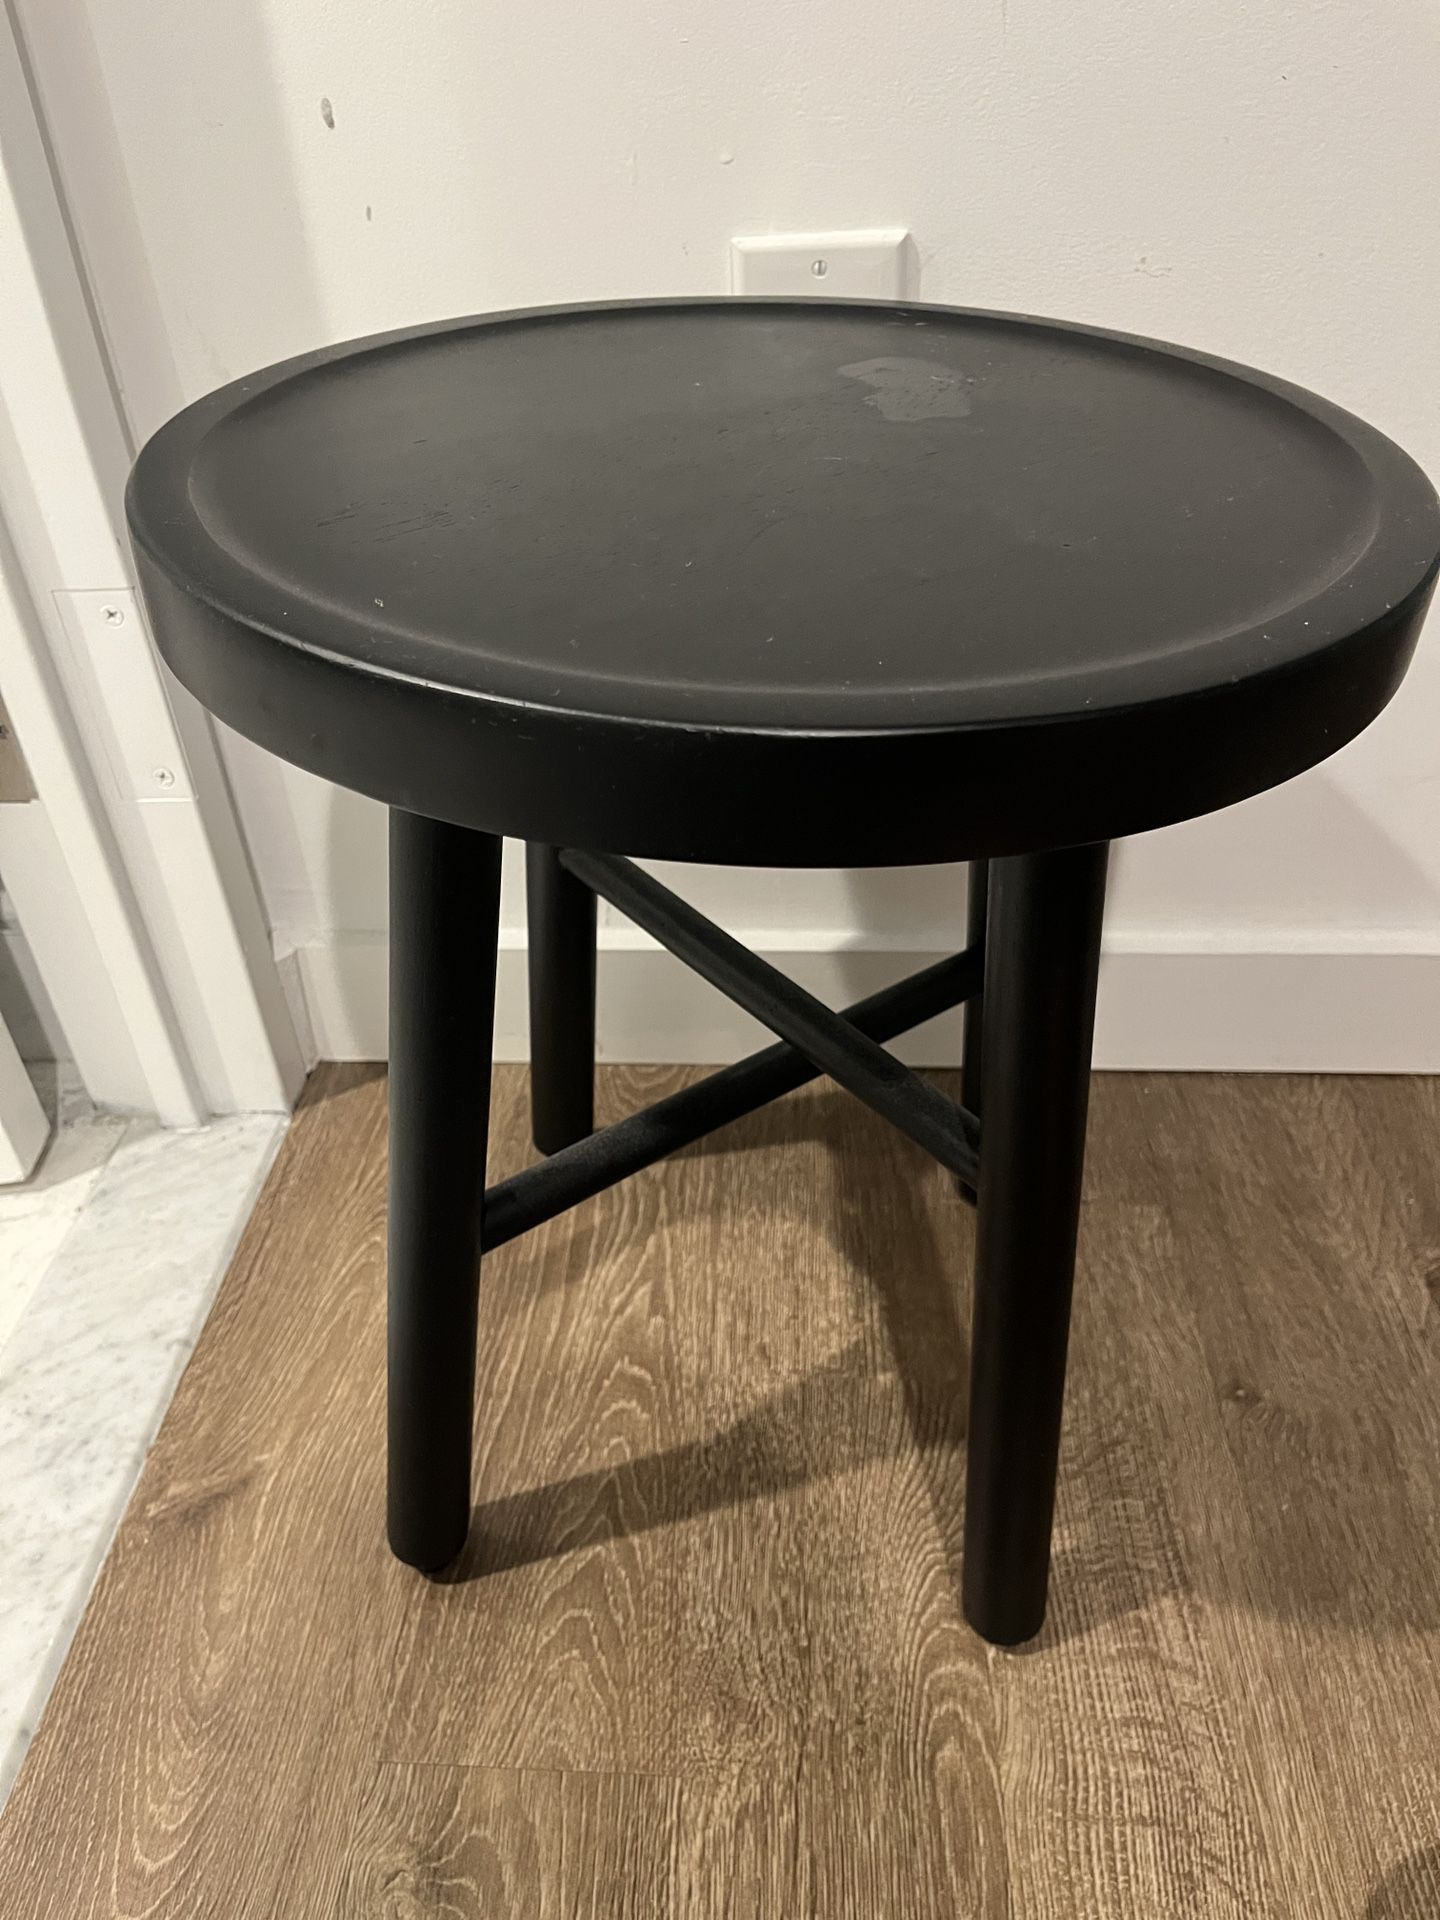 Hearth And Hand Black Accent Stool Nightstand Coffee Table